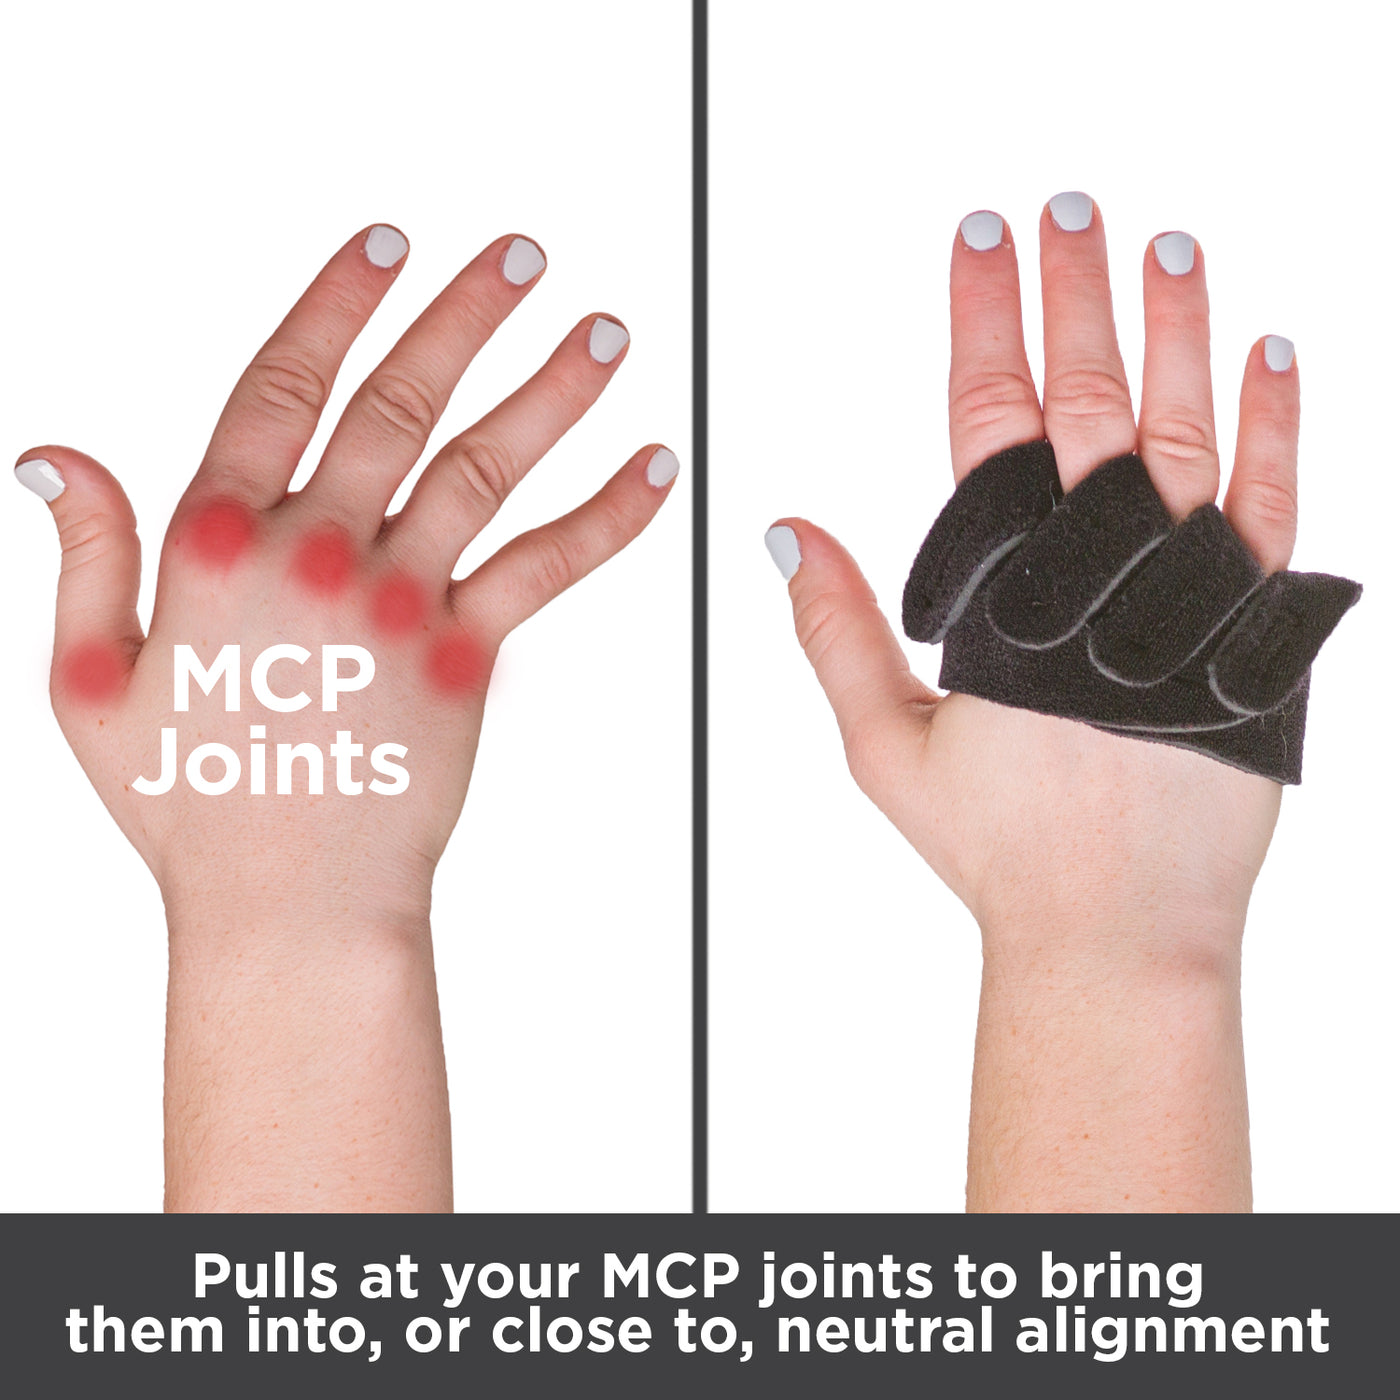 Pulls at your MCP joints to bring them into, or close to, neutral finger alignment